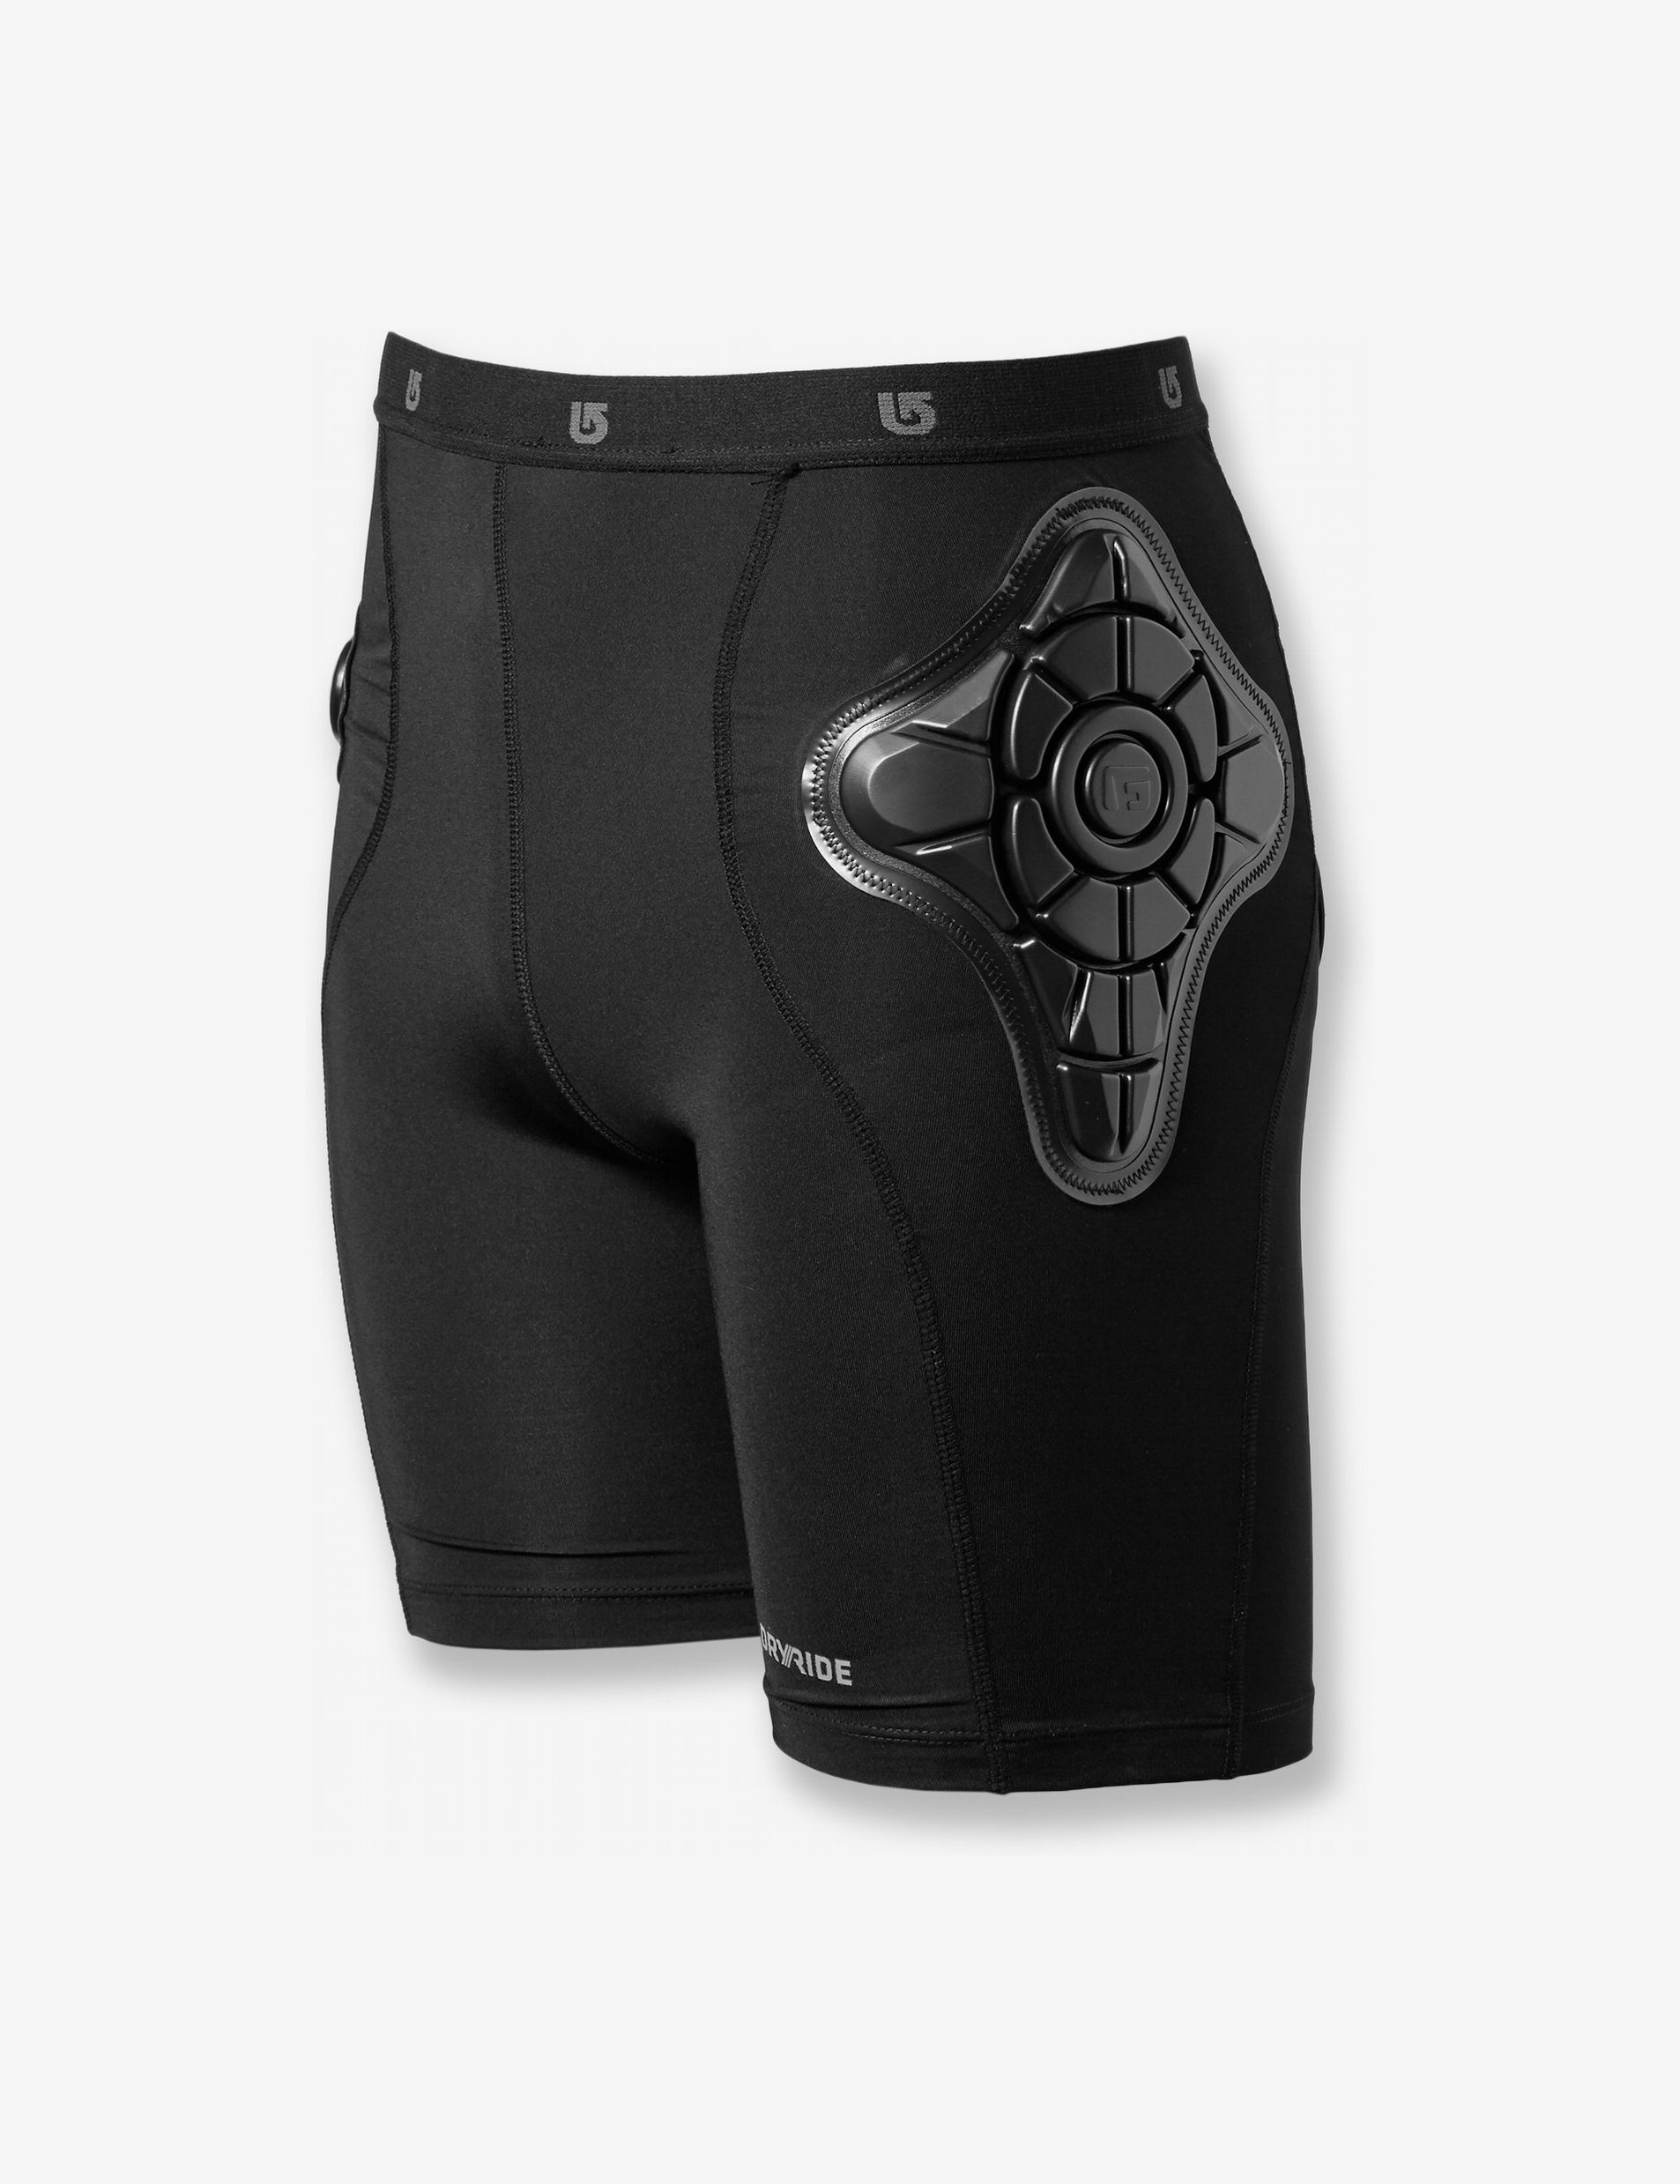 Snowboard Protection Shorts - Are They Needed?